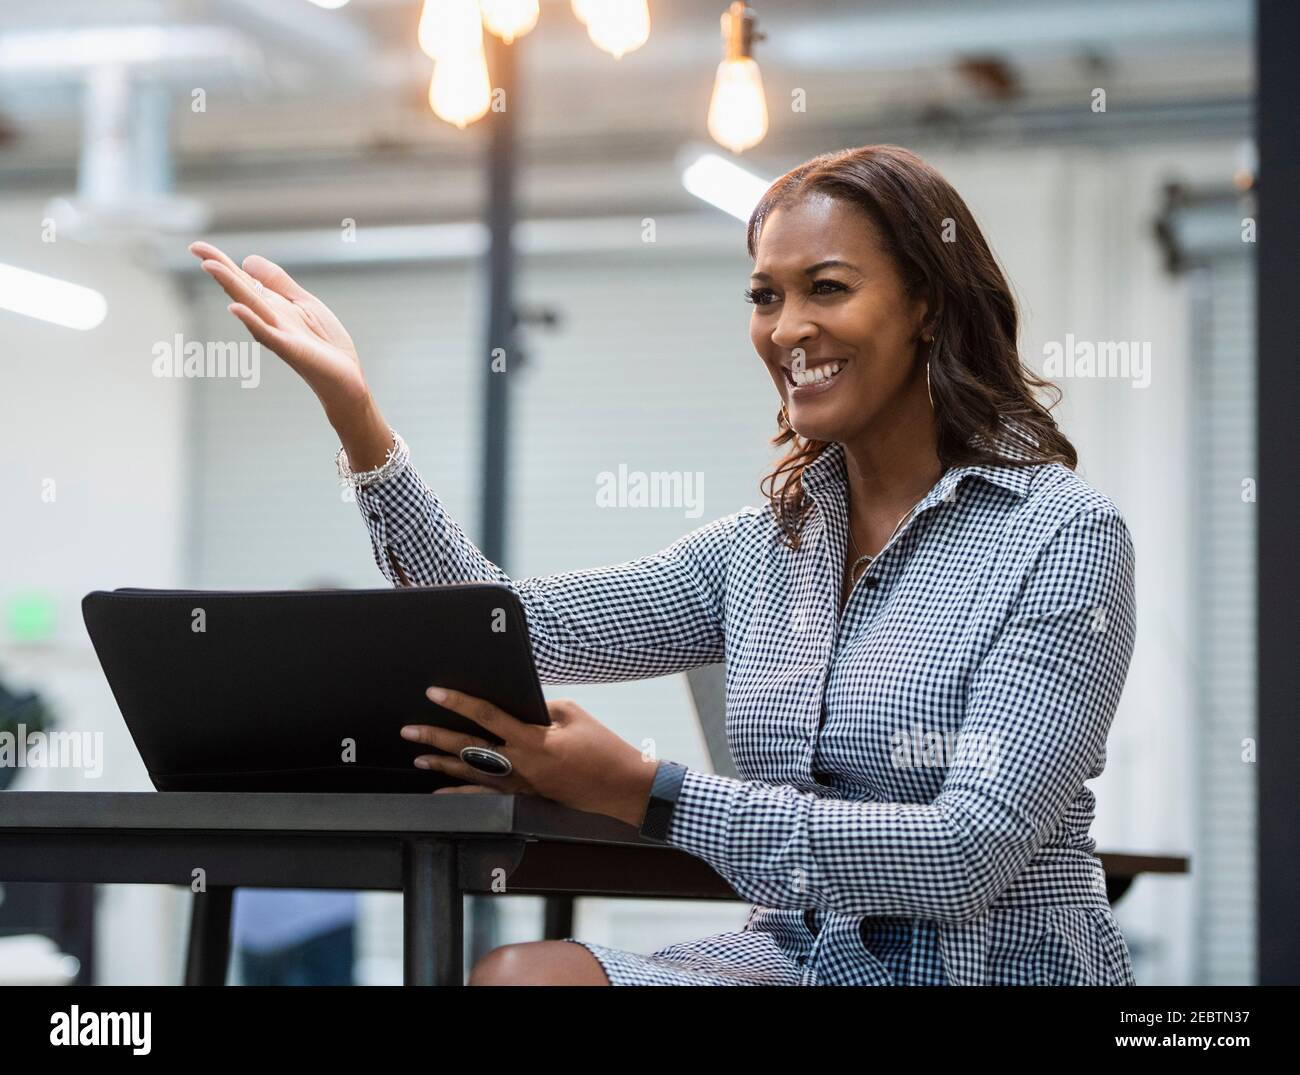 Business woman using laptop in office Stock Photo